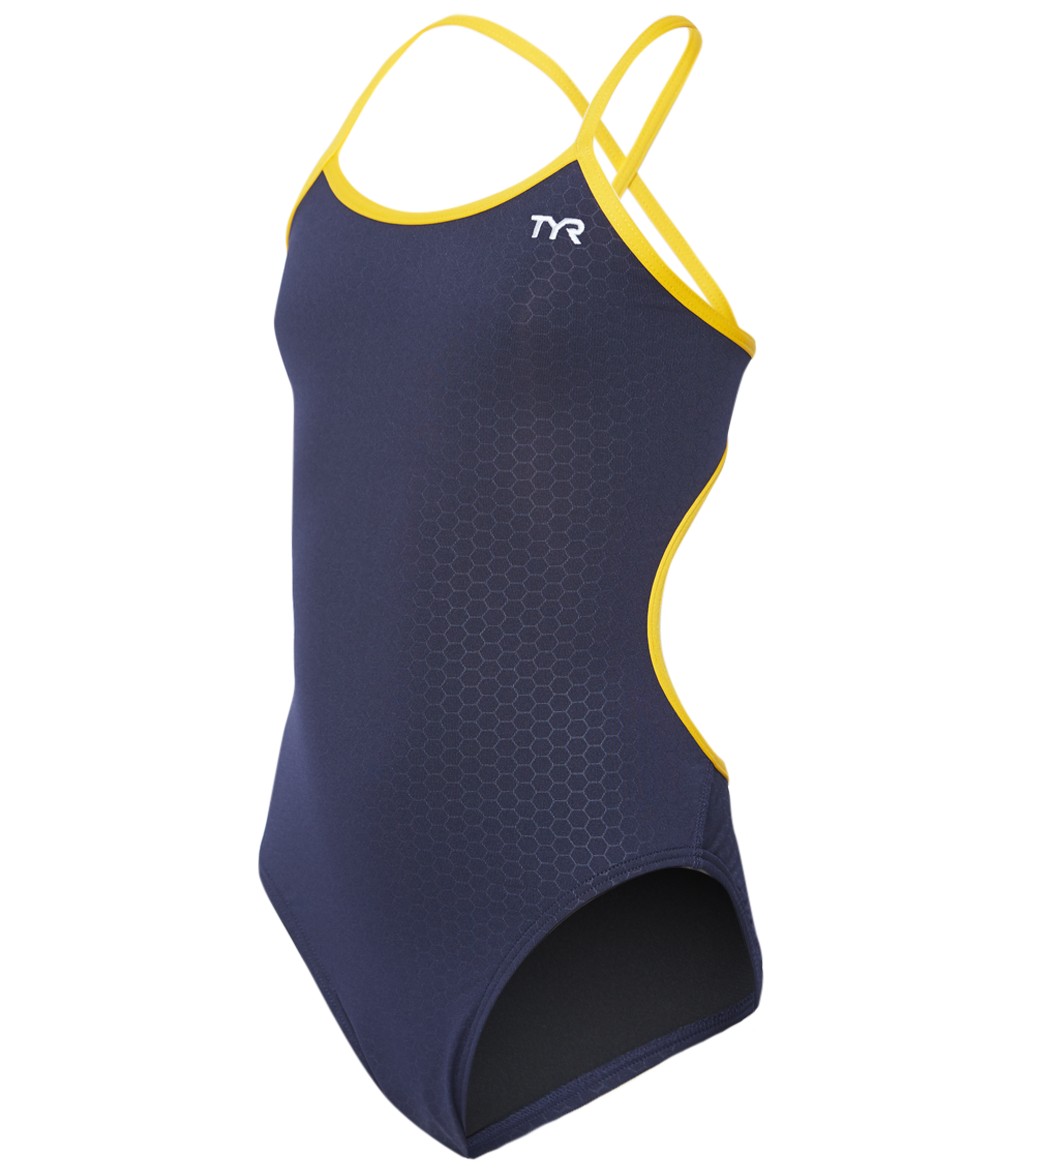 TYR Girls' Hexa Trinityfit One Piece Swimsuit - Navy/Gold 22 Polyester/Spandex - Swimoutlet.com